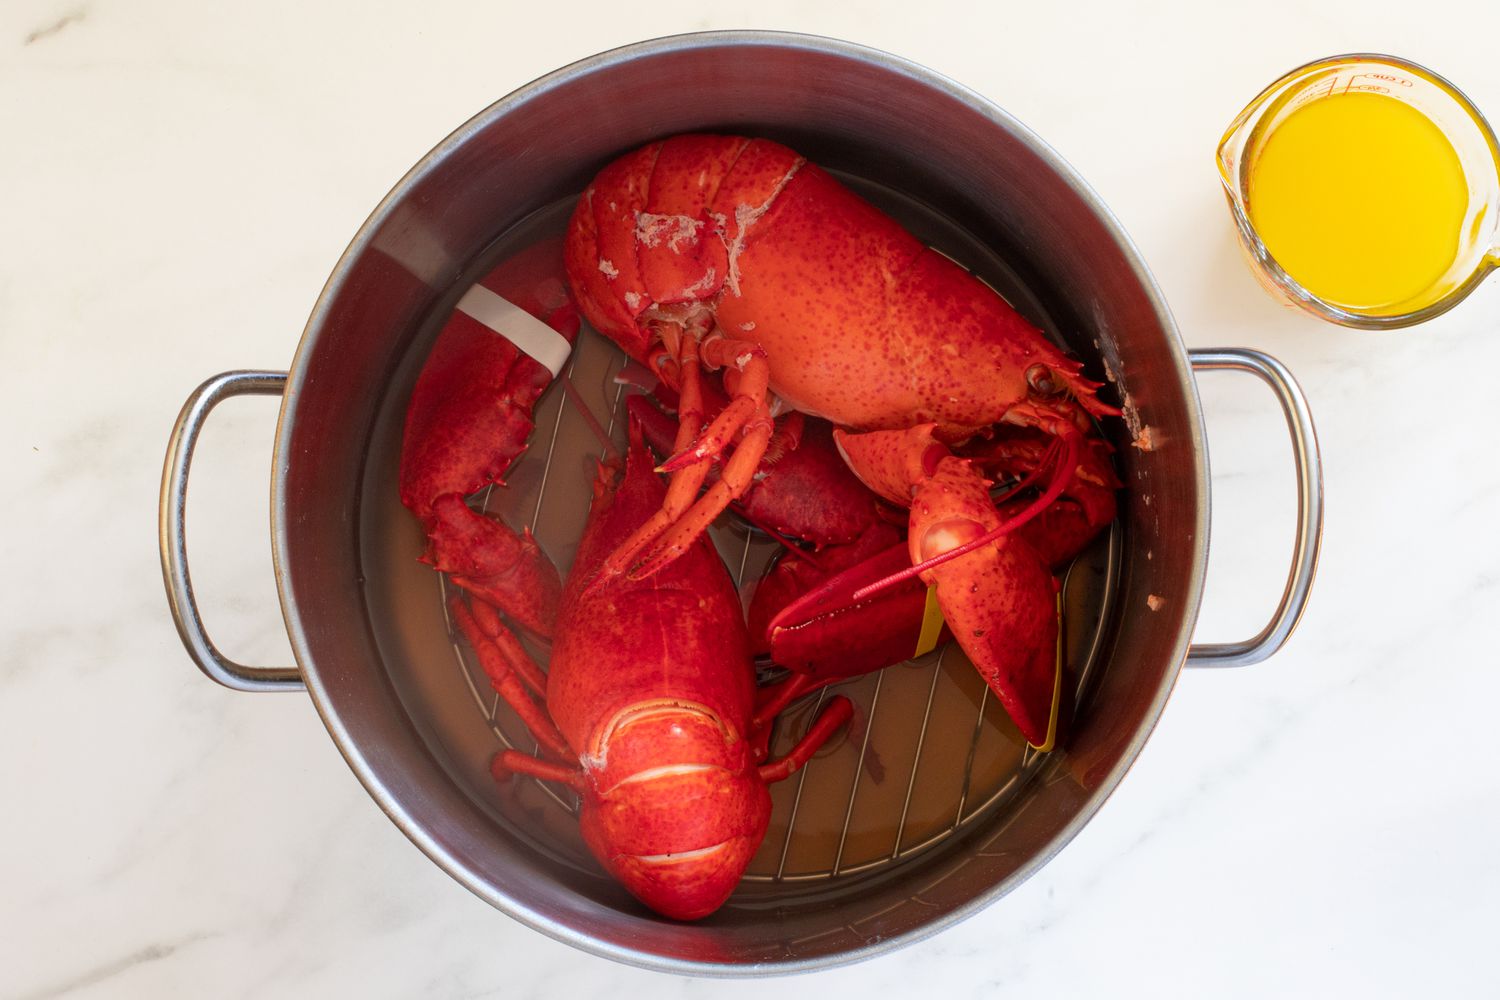 Large Steamed Lobsters